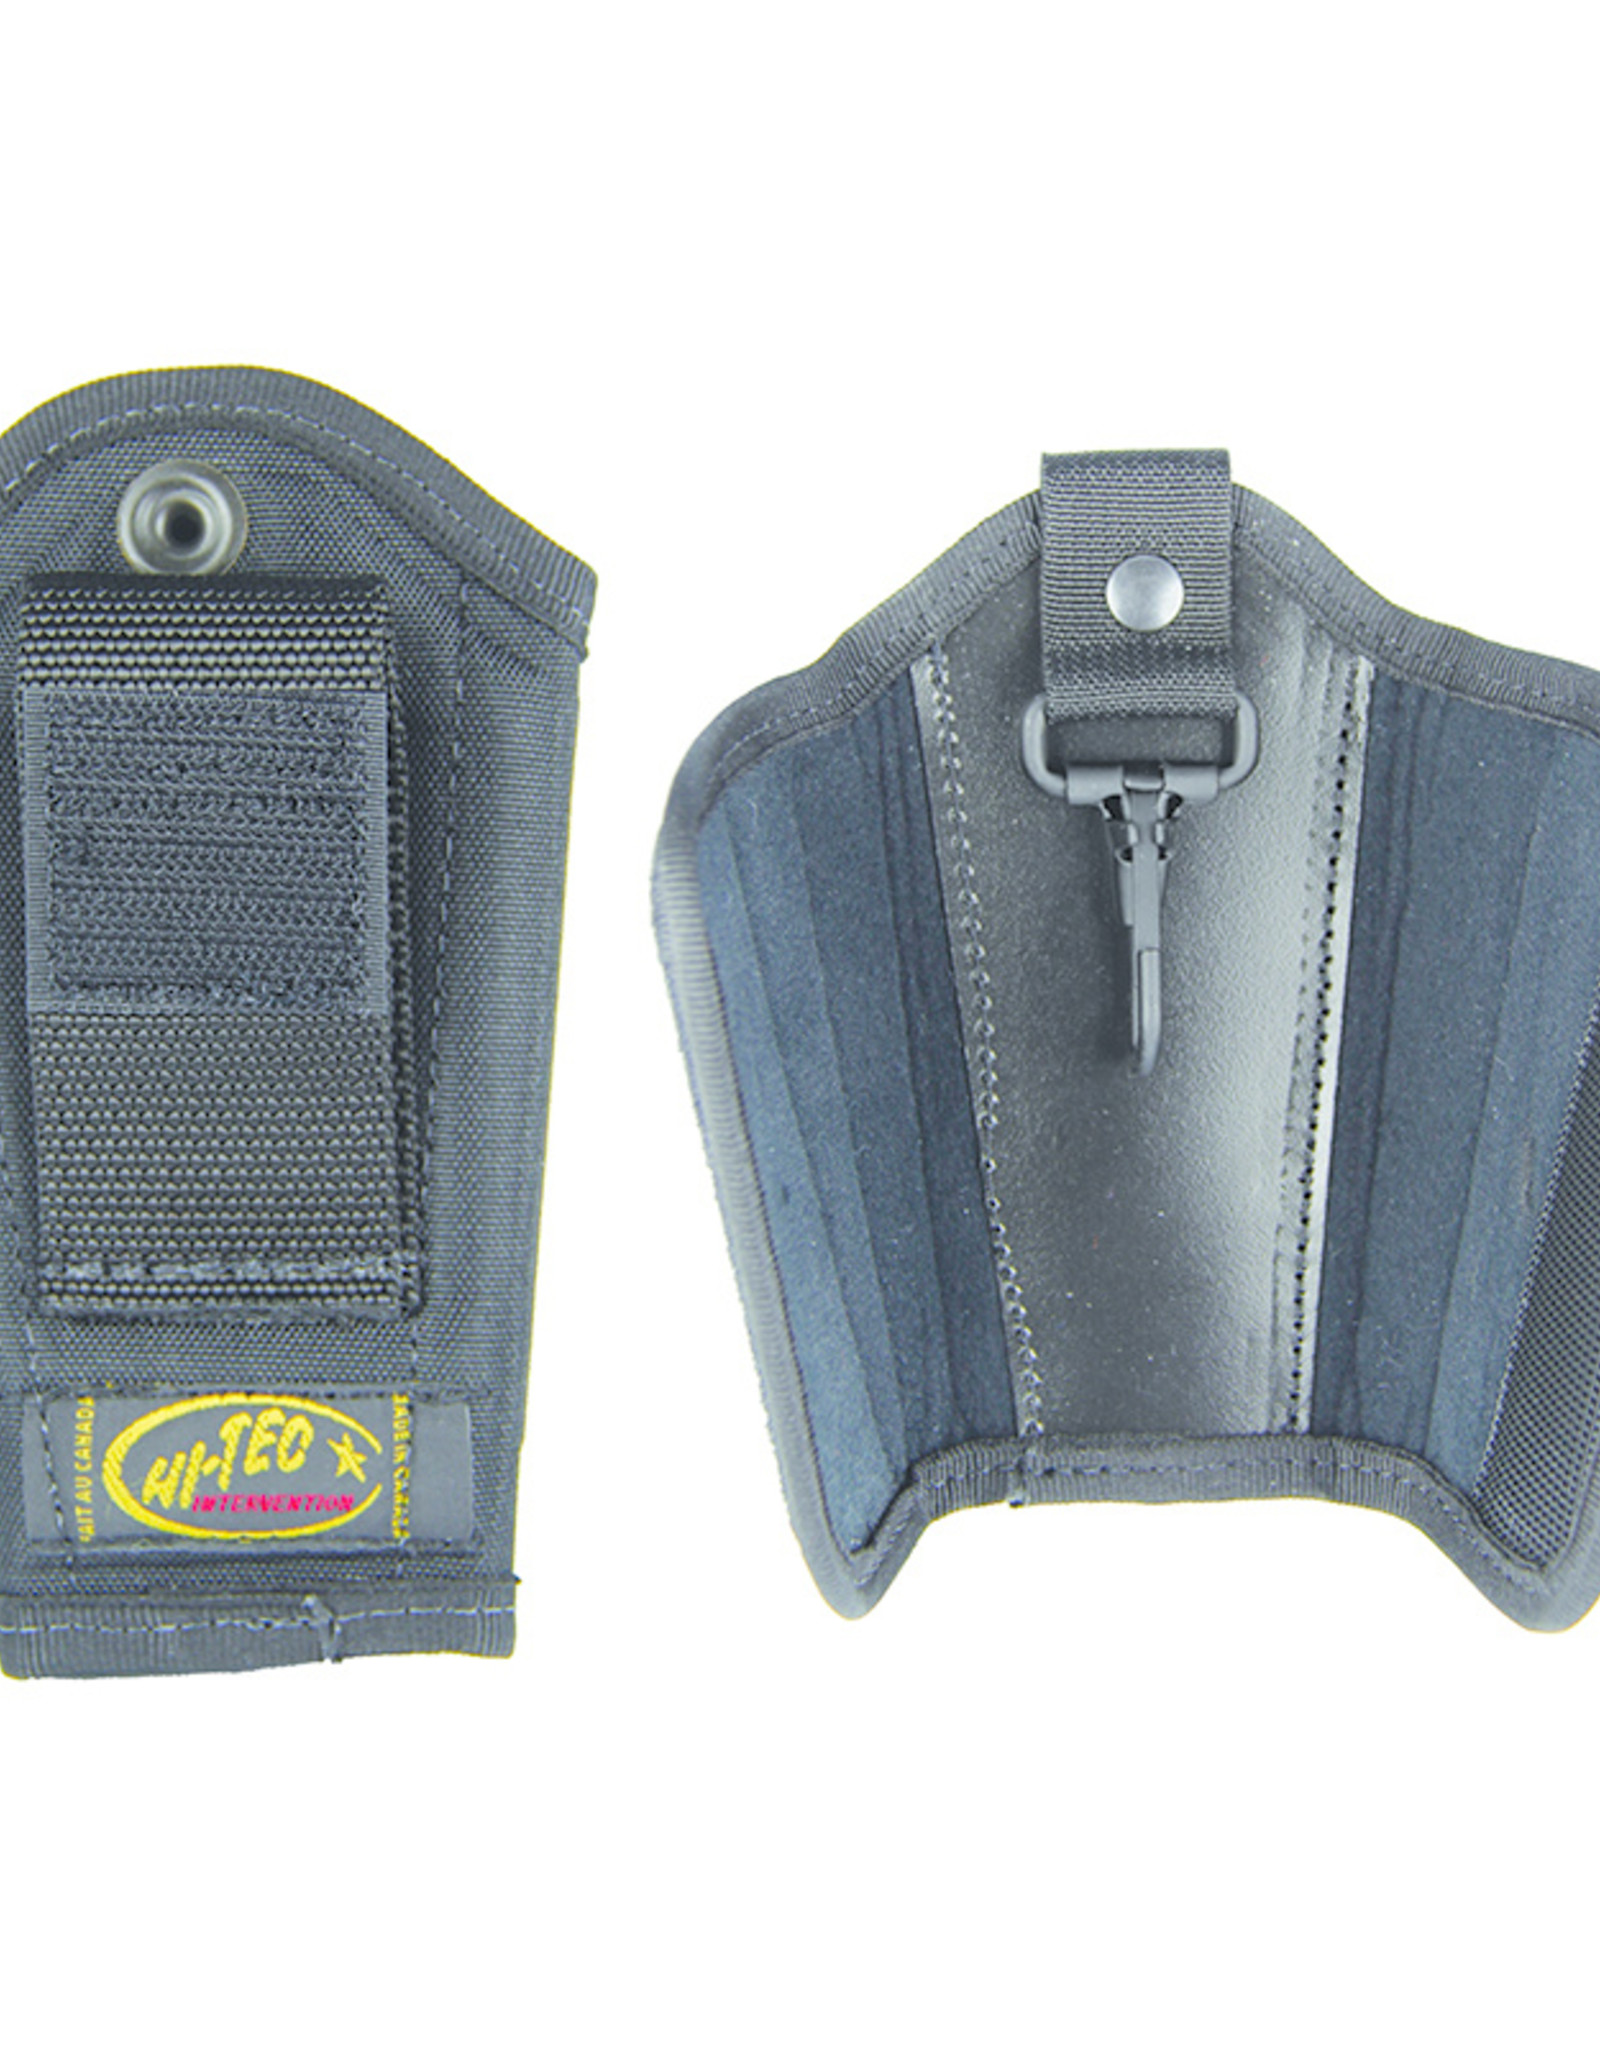 HI-TEC INTERVENTION MOLDED SILENT KEY HOLDER WITH OPEN BELT LOOP AND METAL CLIP - DS506-91